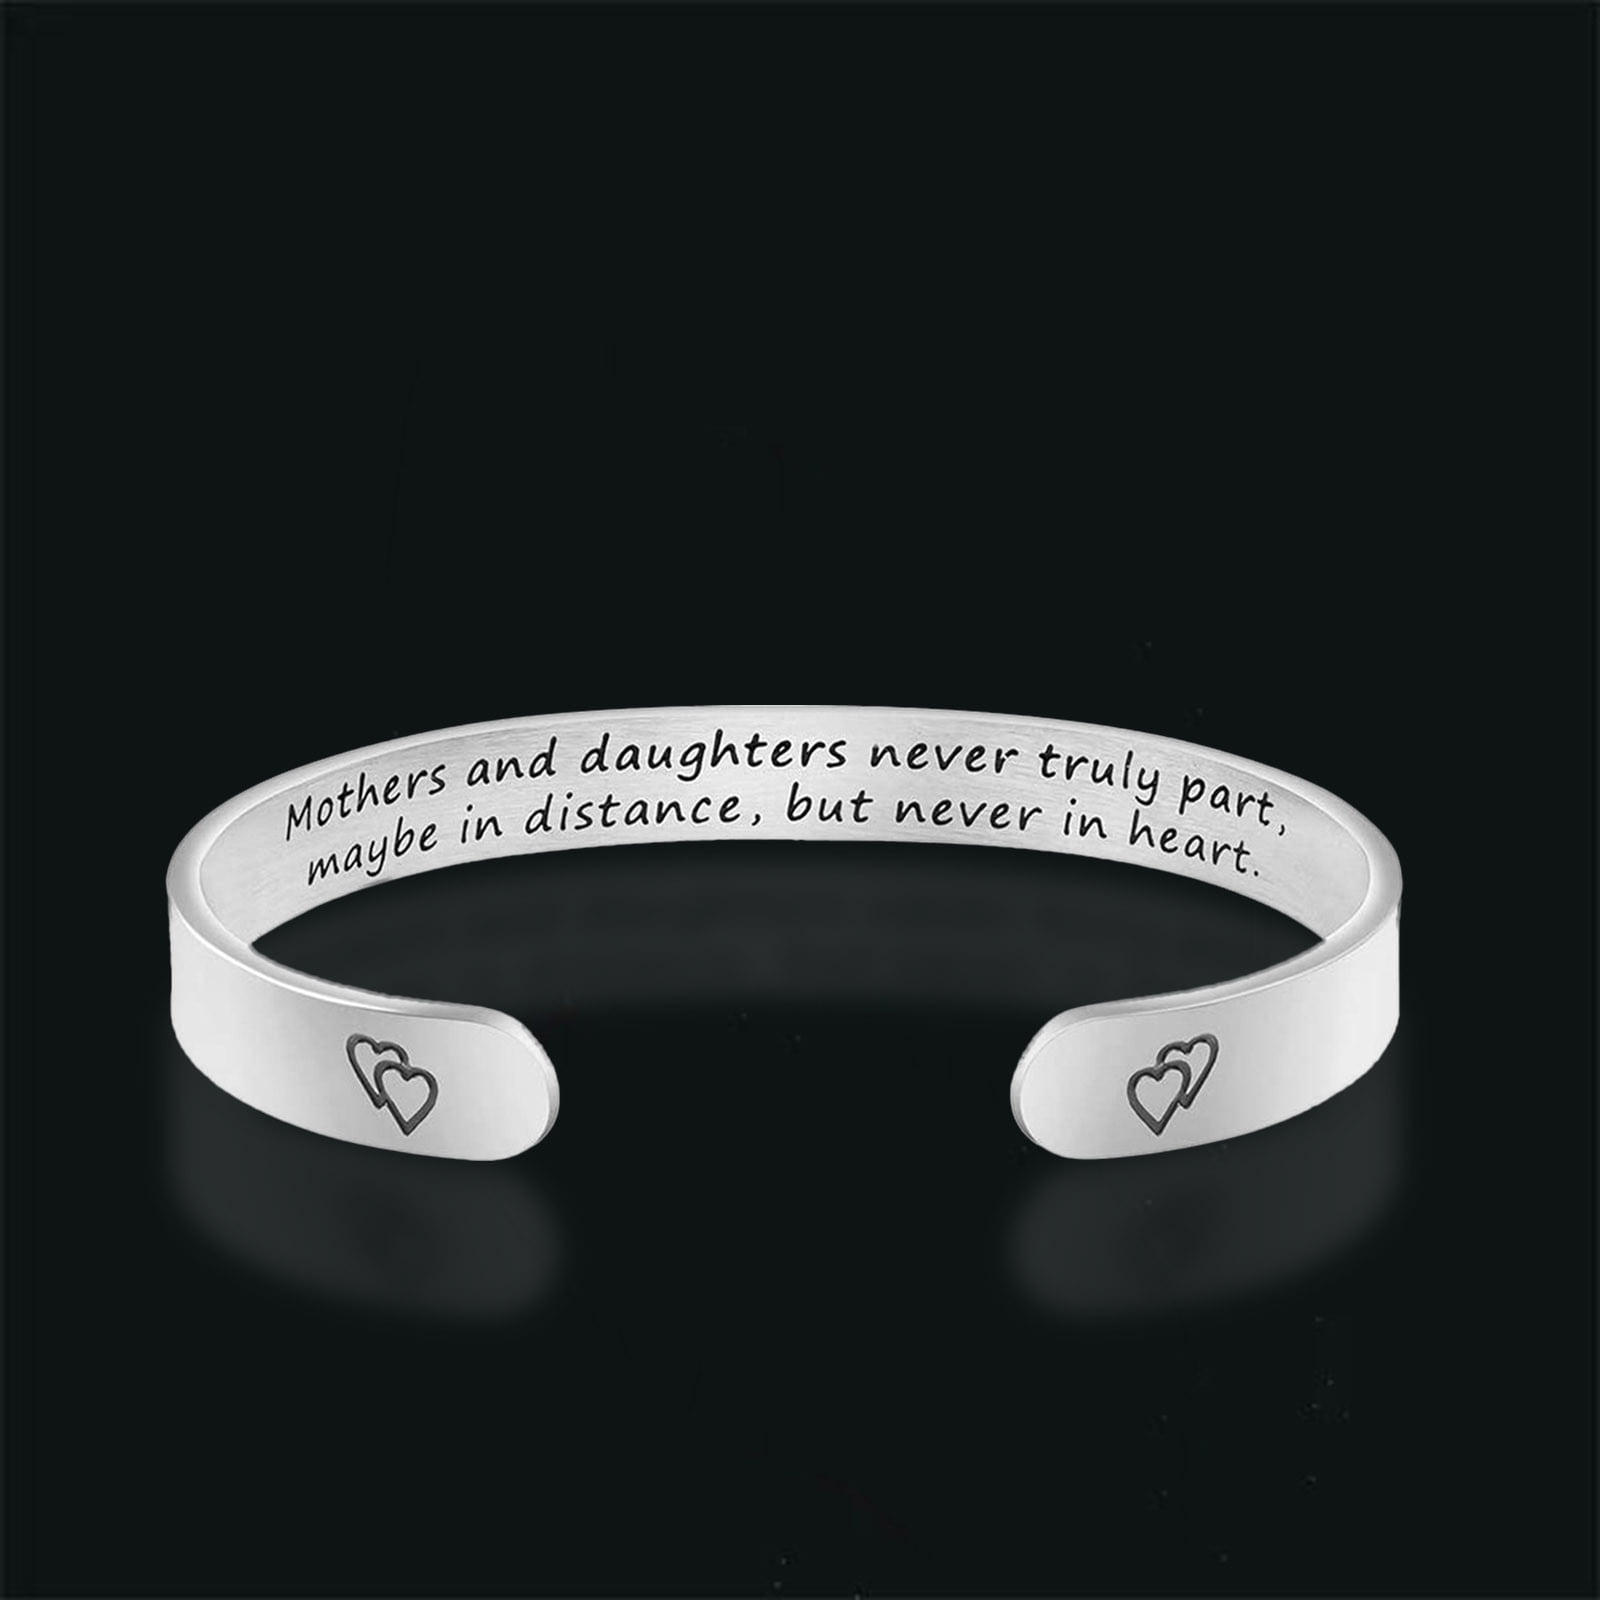 Engraved Gift For Stepmom Black Stainless Steel Bracelet Maybe In Distance Stepmom And Stepson Never Truly Part But Never In Heart